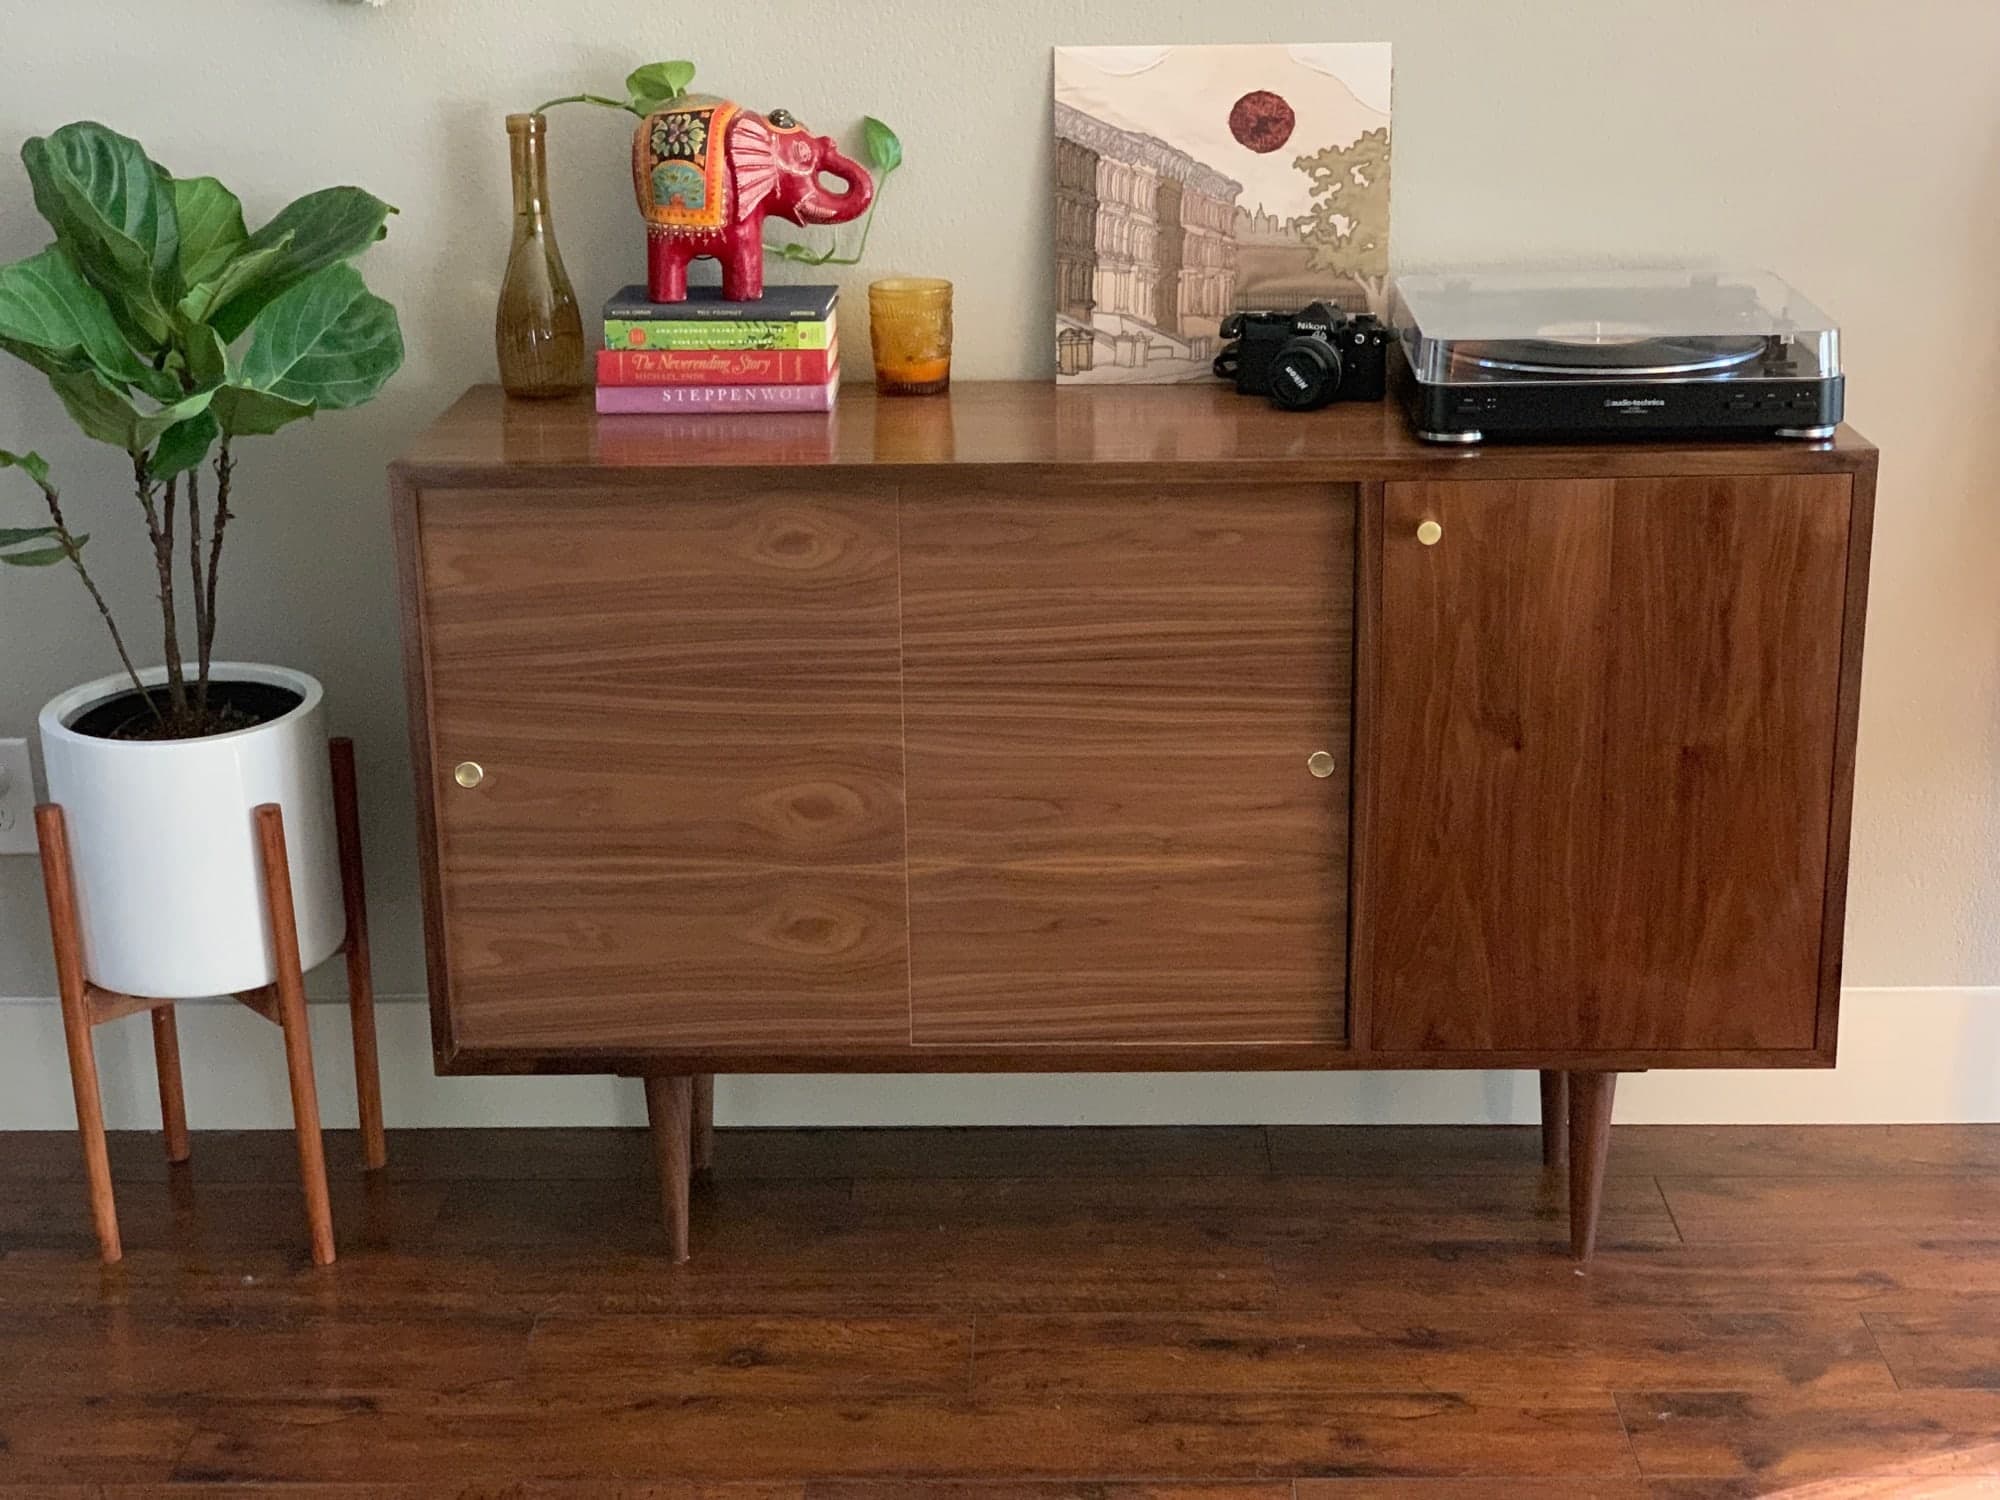 Finished credenza, from another angle in my house with decor on and around it